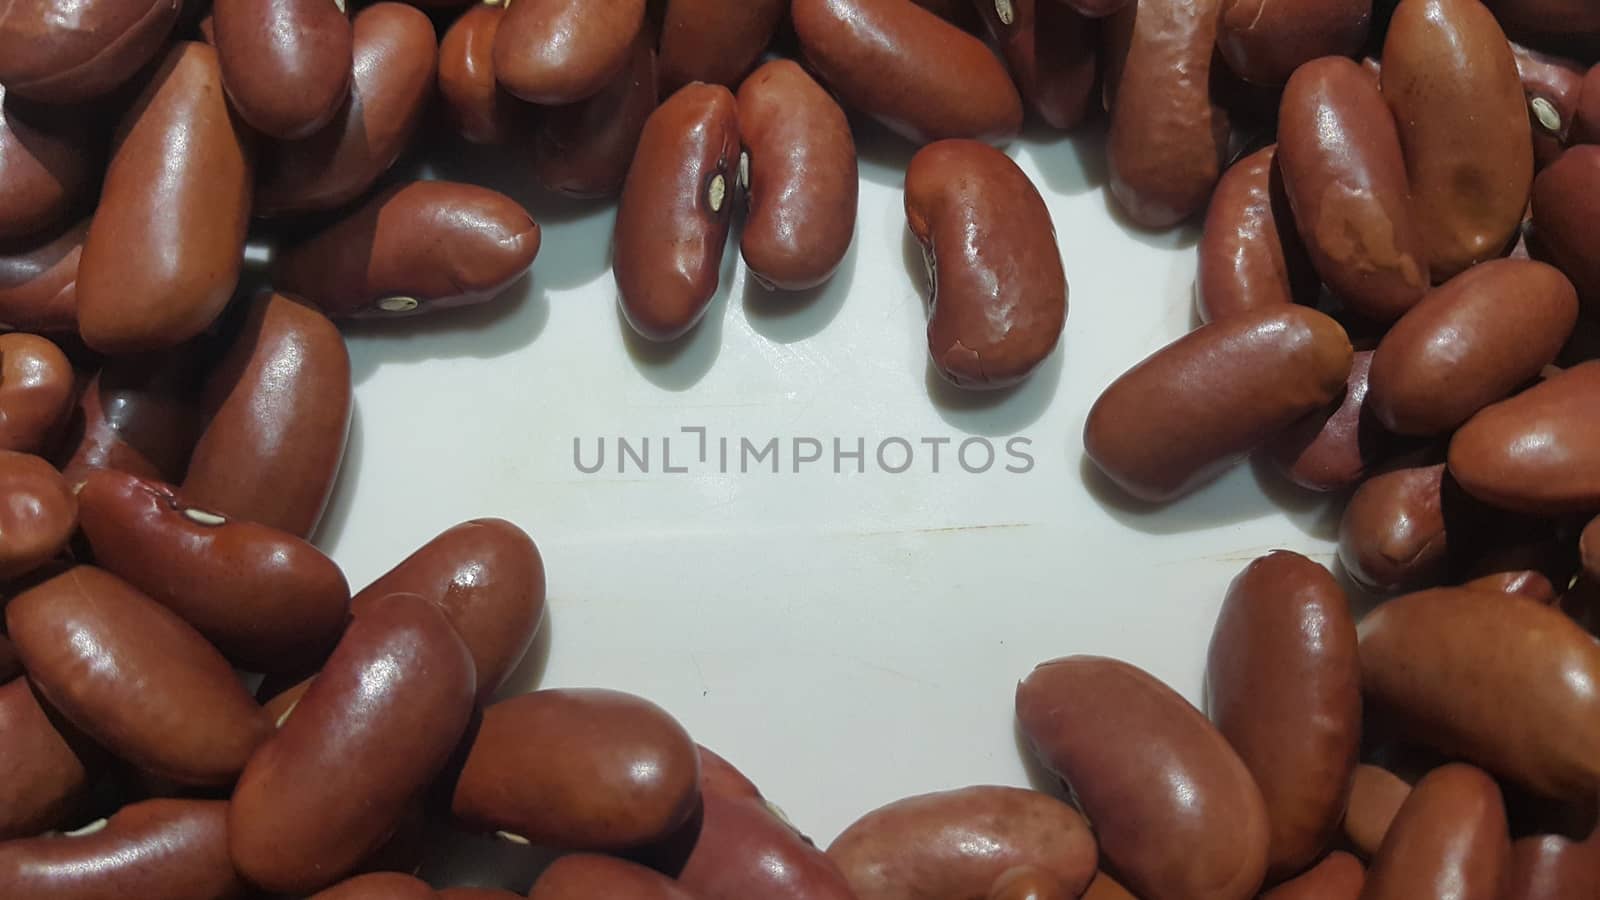 Kidenry beans: Closeup view of uncooked red kidney beans by Photochowk